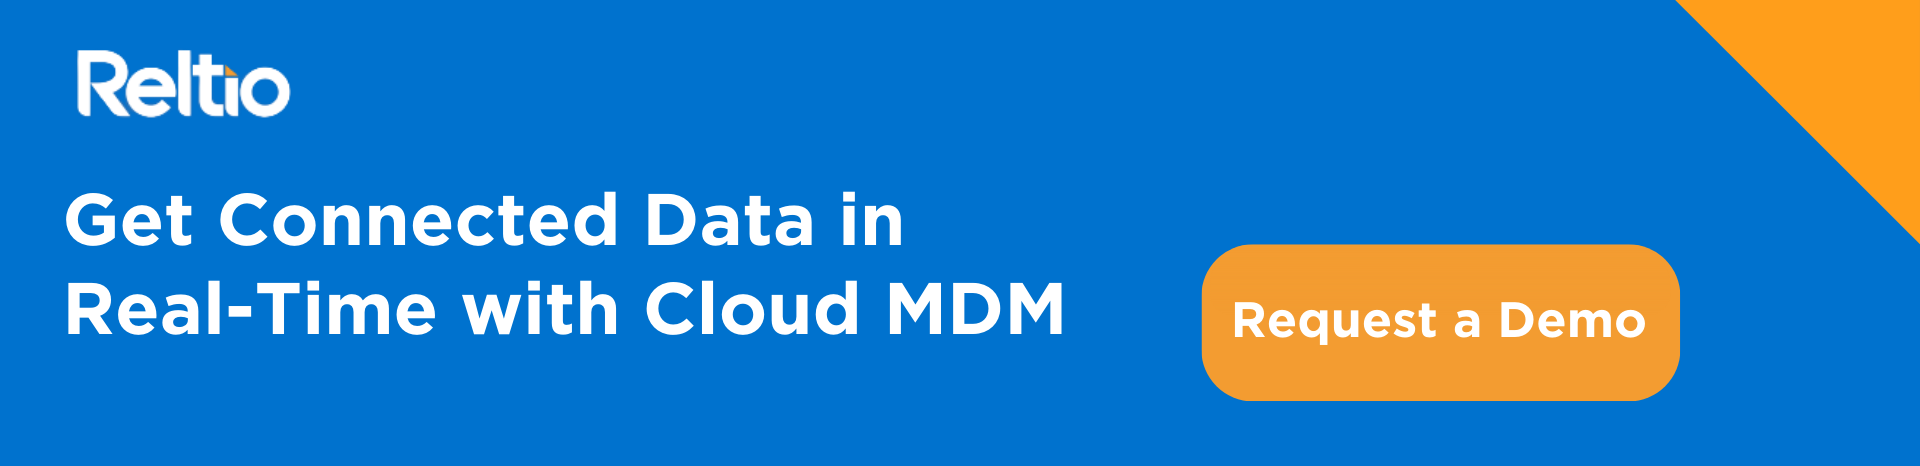 Get Connected Data in Real-Time with Cloud MDM. Request a Demo!